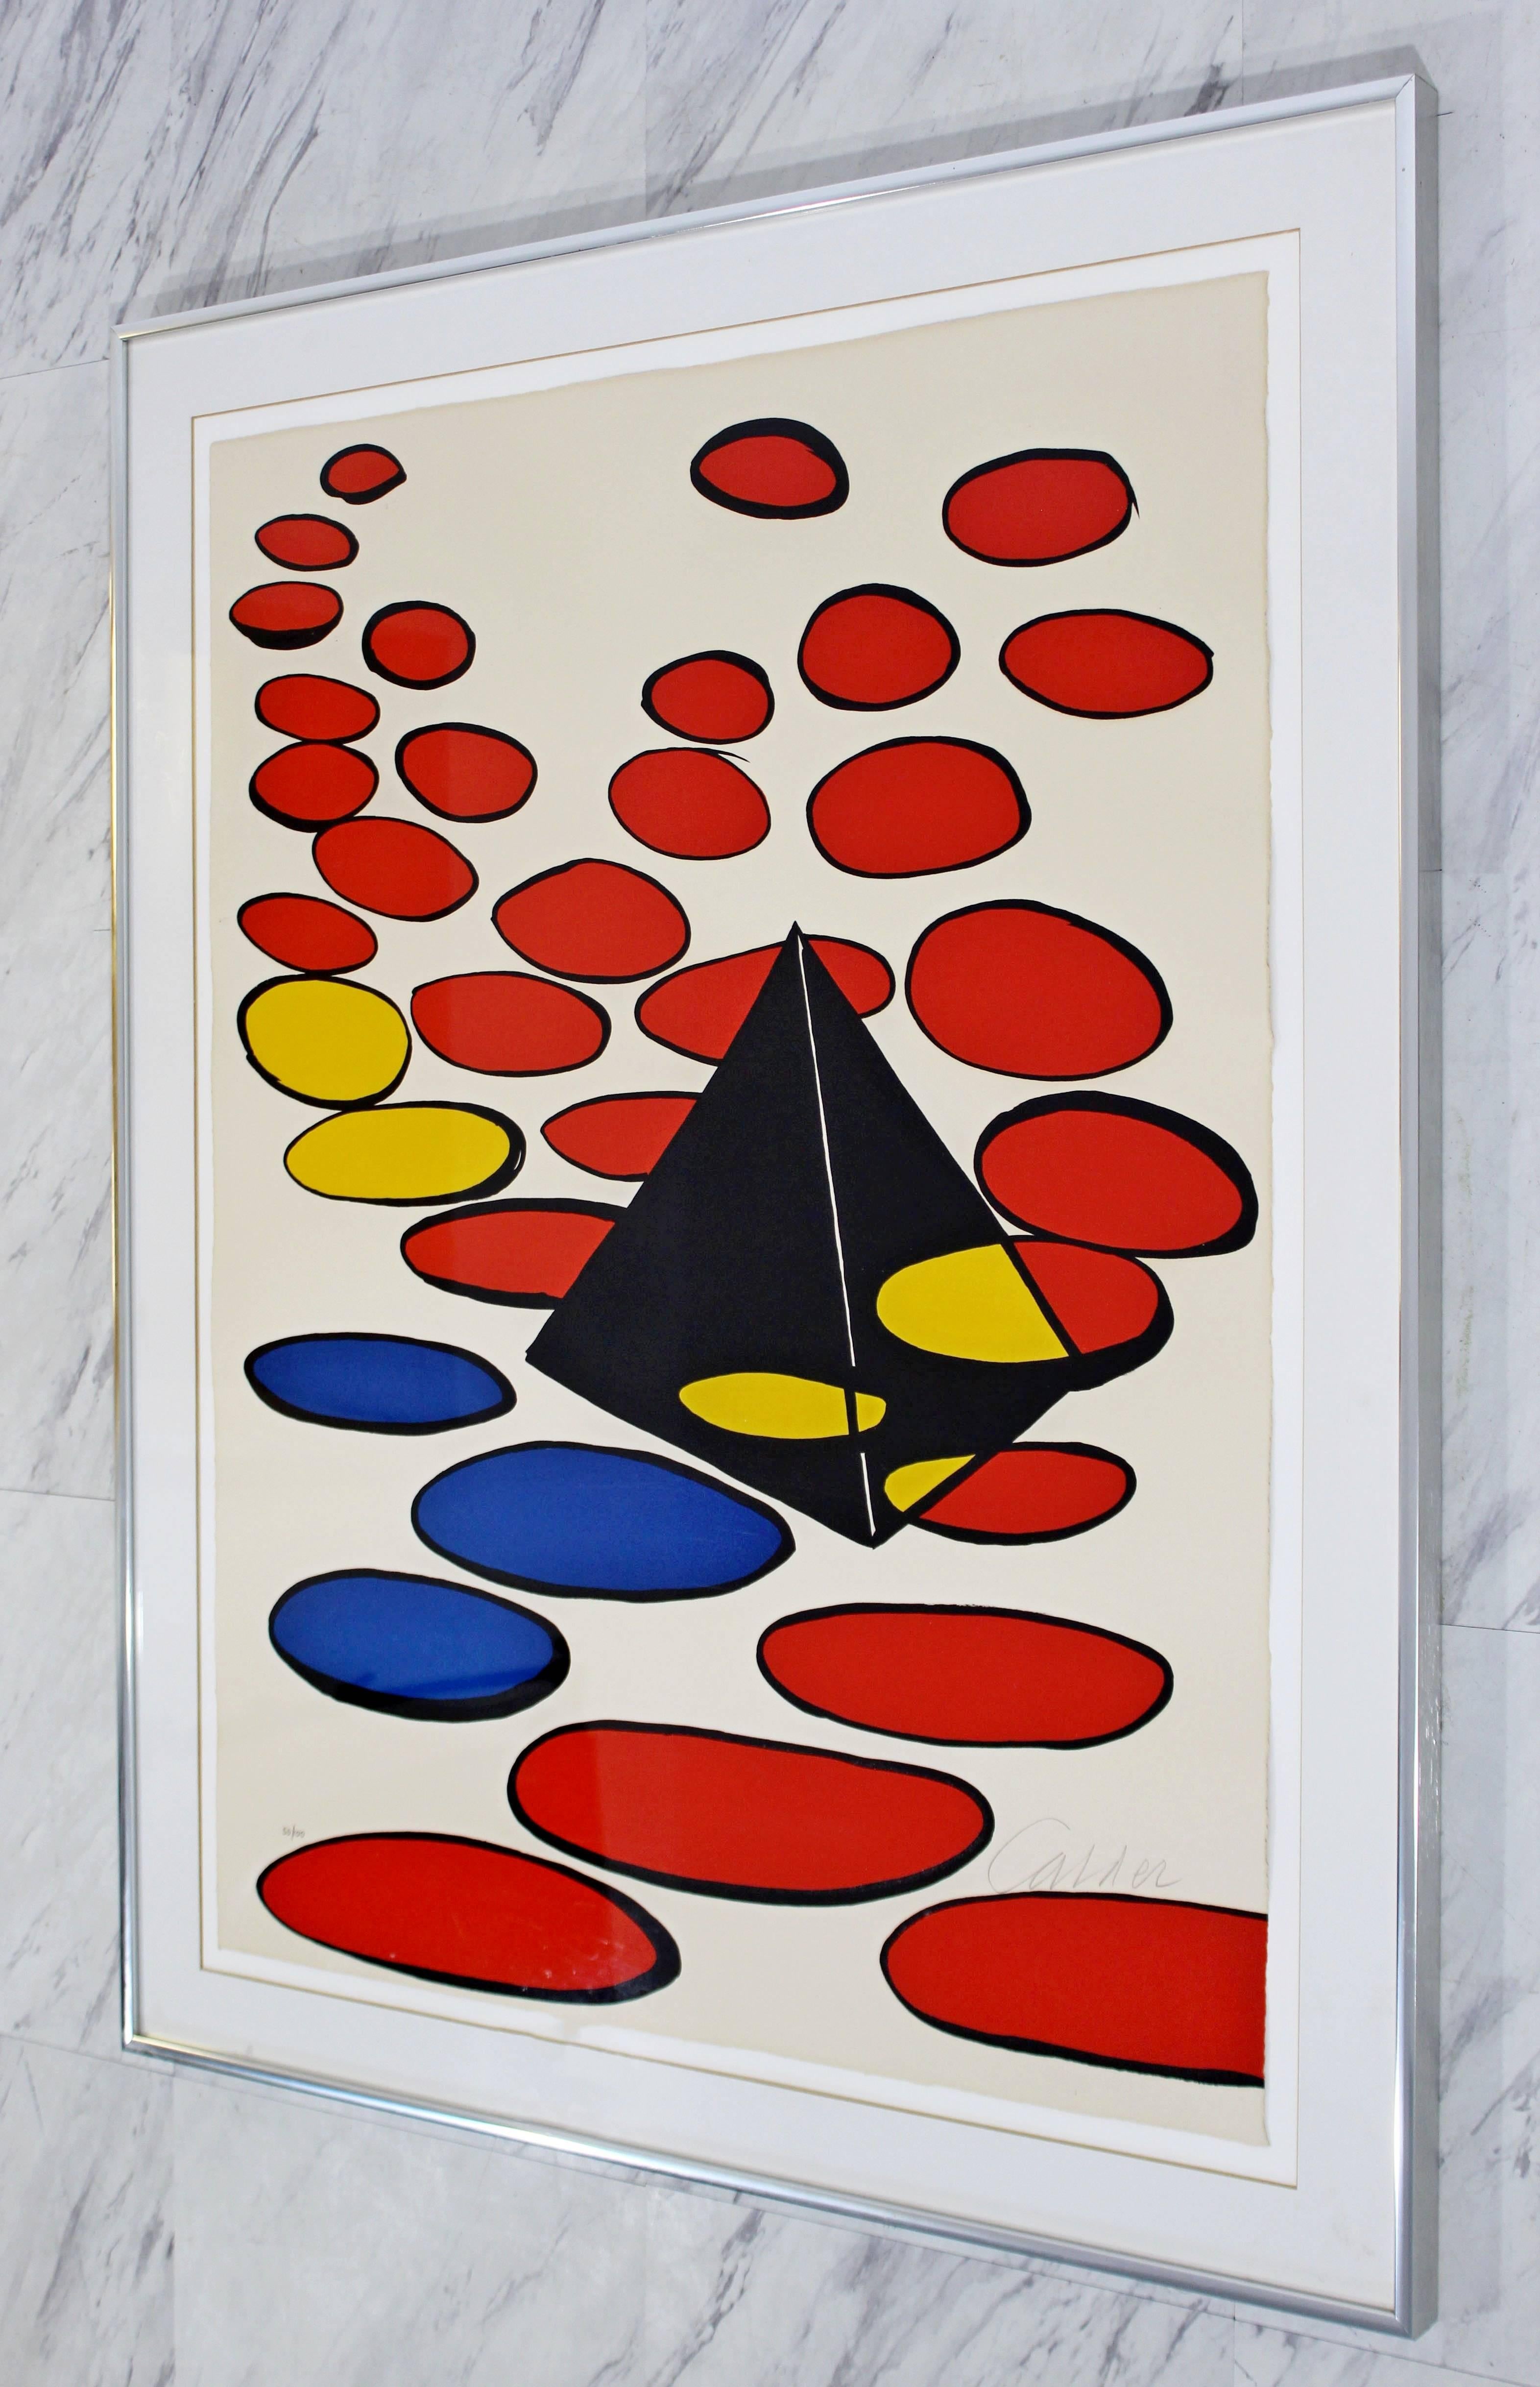 For your consideration is a fun, prime color, lithograph on cream woven paper, pencil signed and numbered by Alexander Calder, 50/100. In excellent condition. The dimensions of the frame are 28